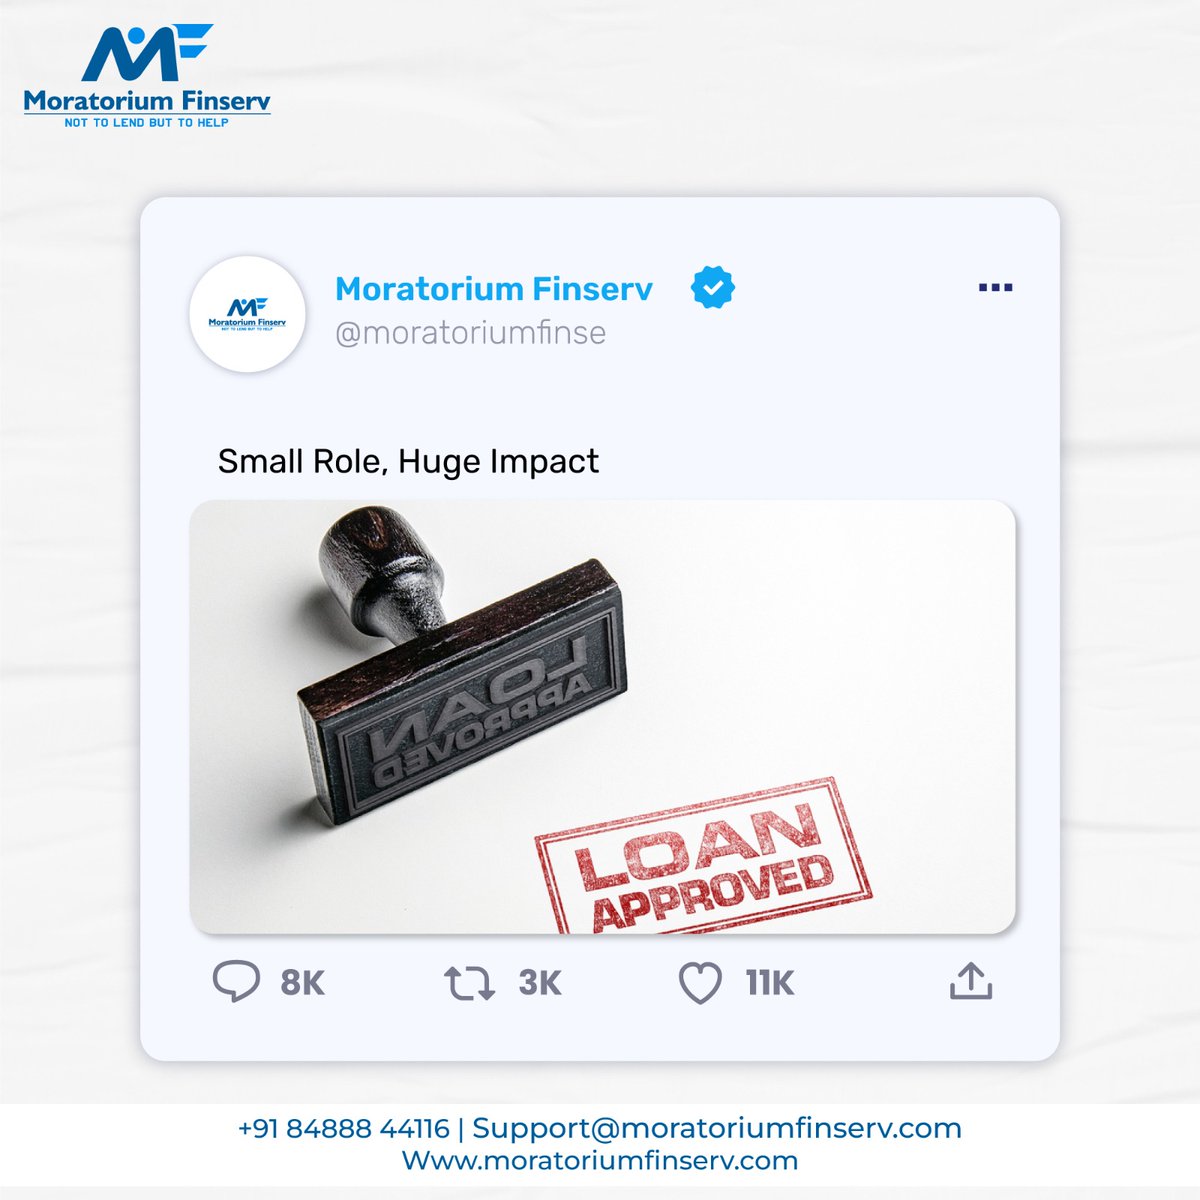 'Get your loan approved hassle-free with Moratorium Finserv'
#MoratoriumFinserv #LoanApproval #FinancialServices #NoMoreTension #StressFree #EasyLoans #FinanceMadeEasy #MoneyMatters #QuickApproval #HassleFreeLoans #FinancialFreedom #MoneyManagement #SmartFinance